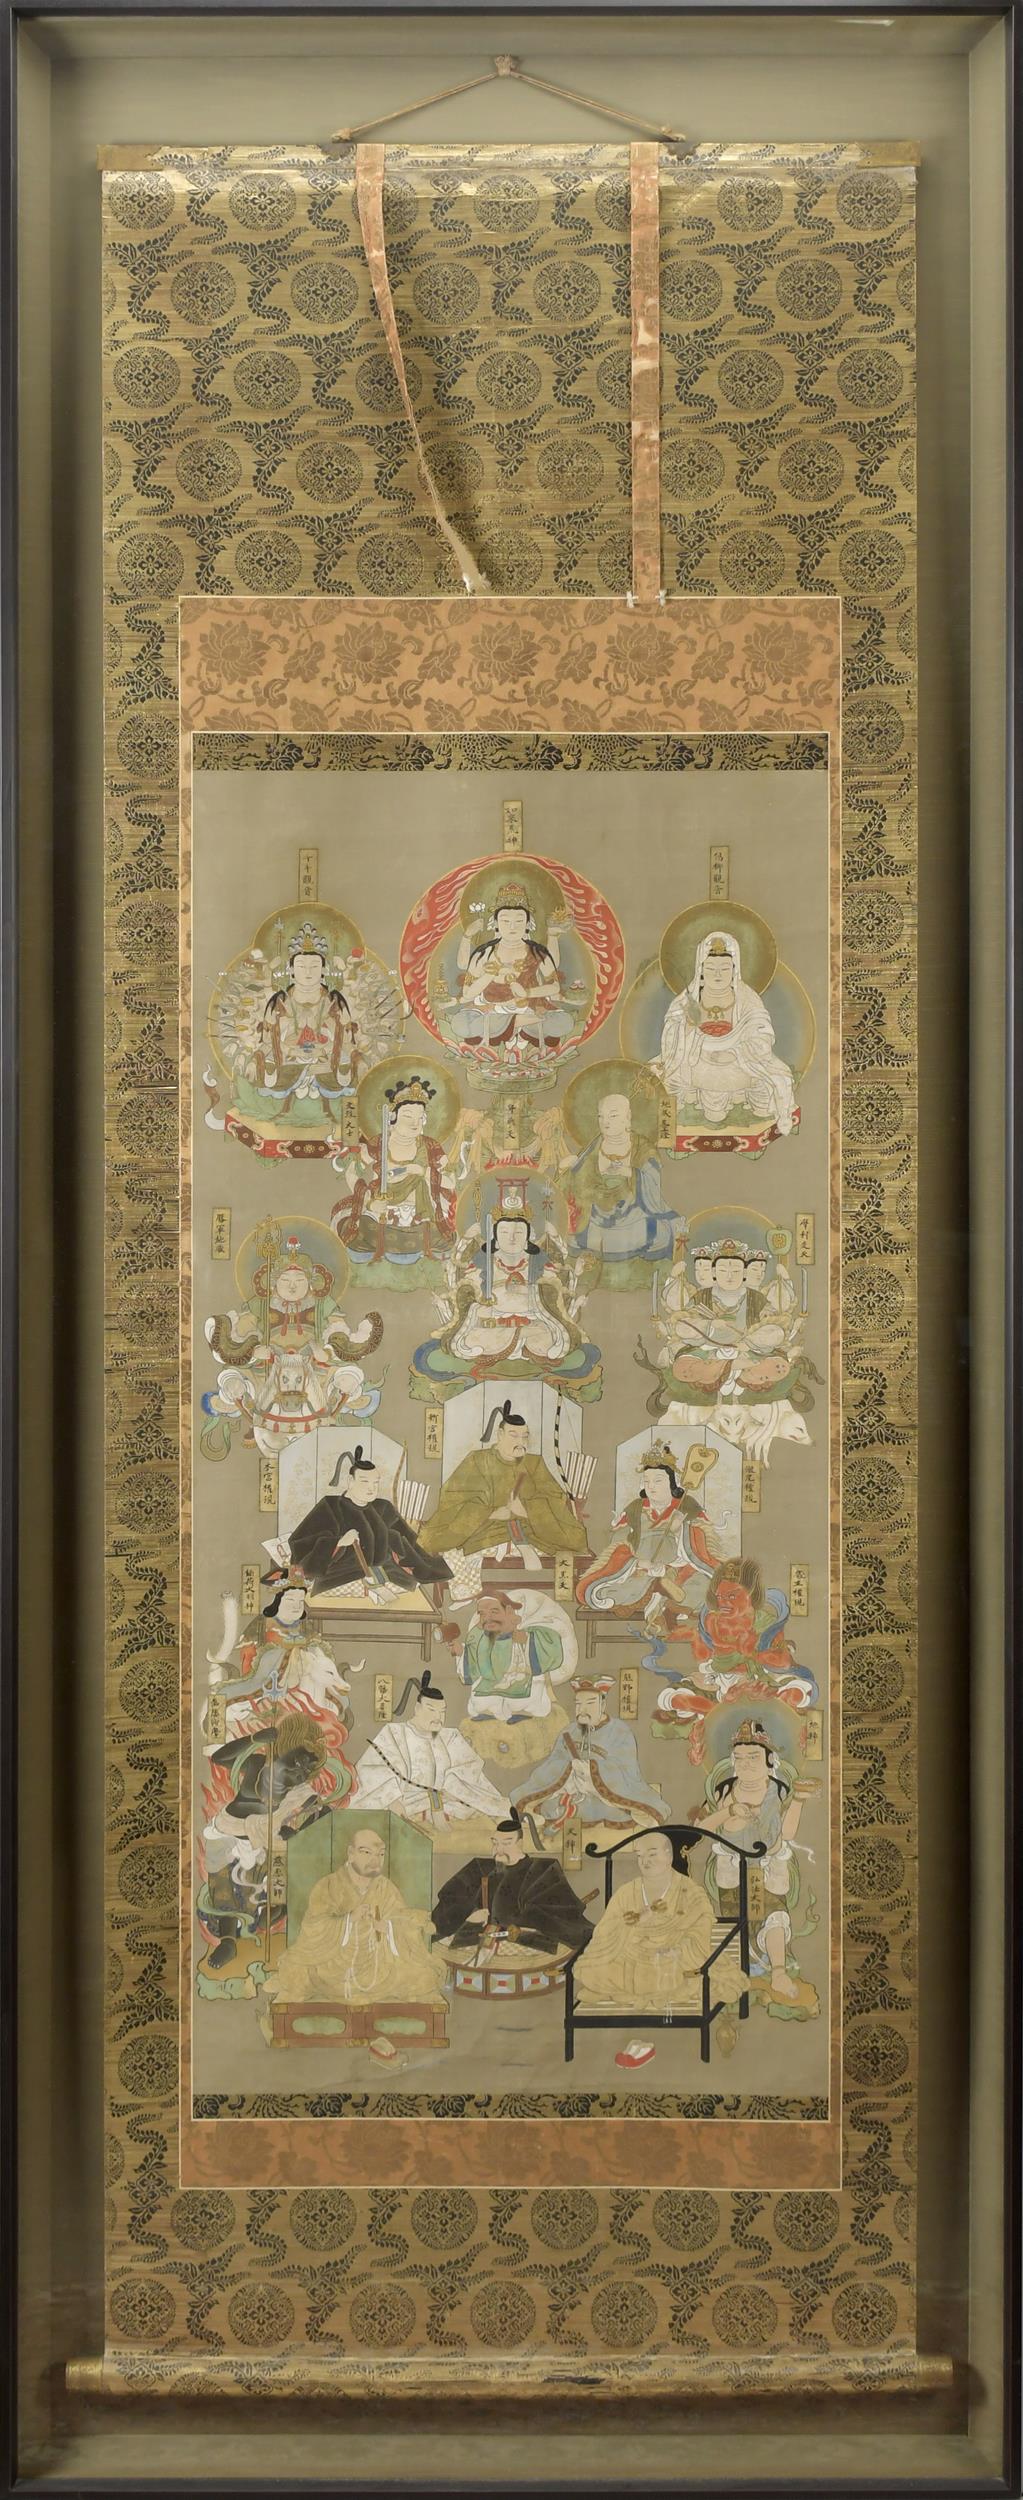 FINE CHINESE SCROLL PAINTING. An